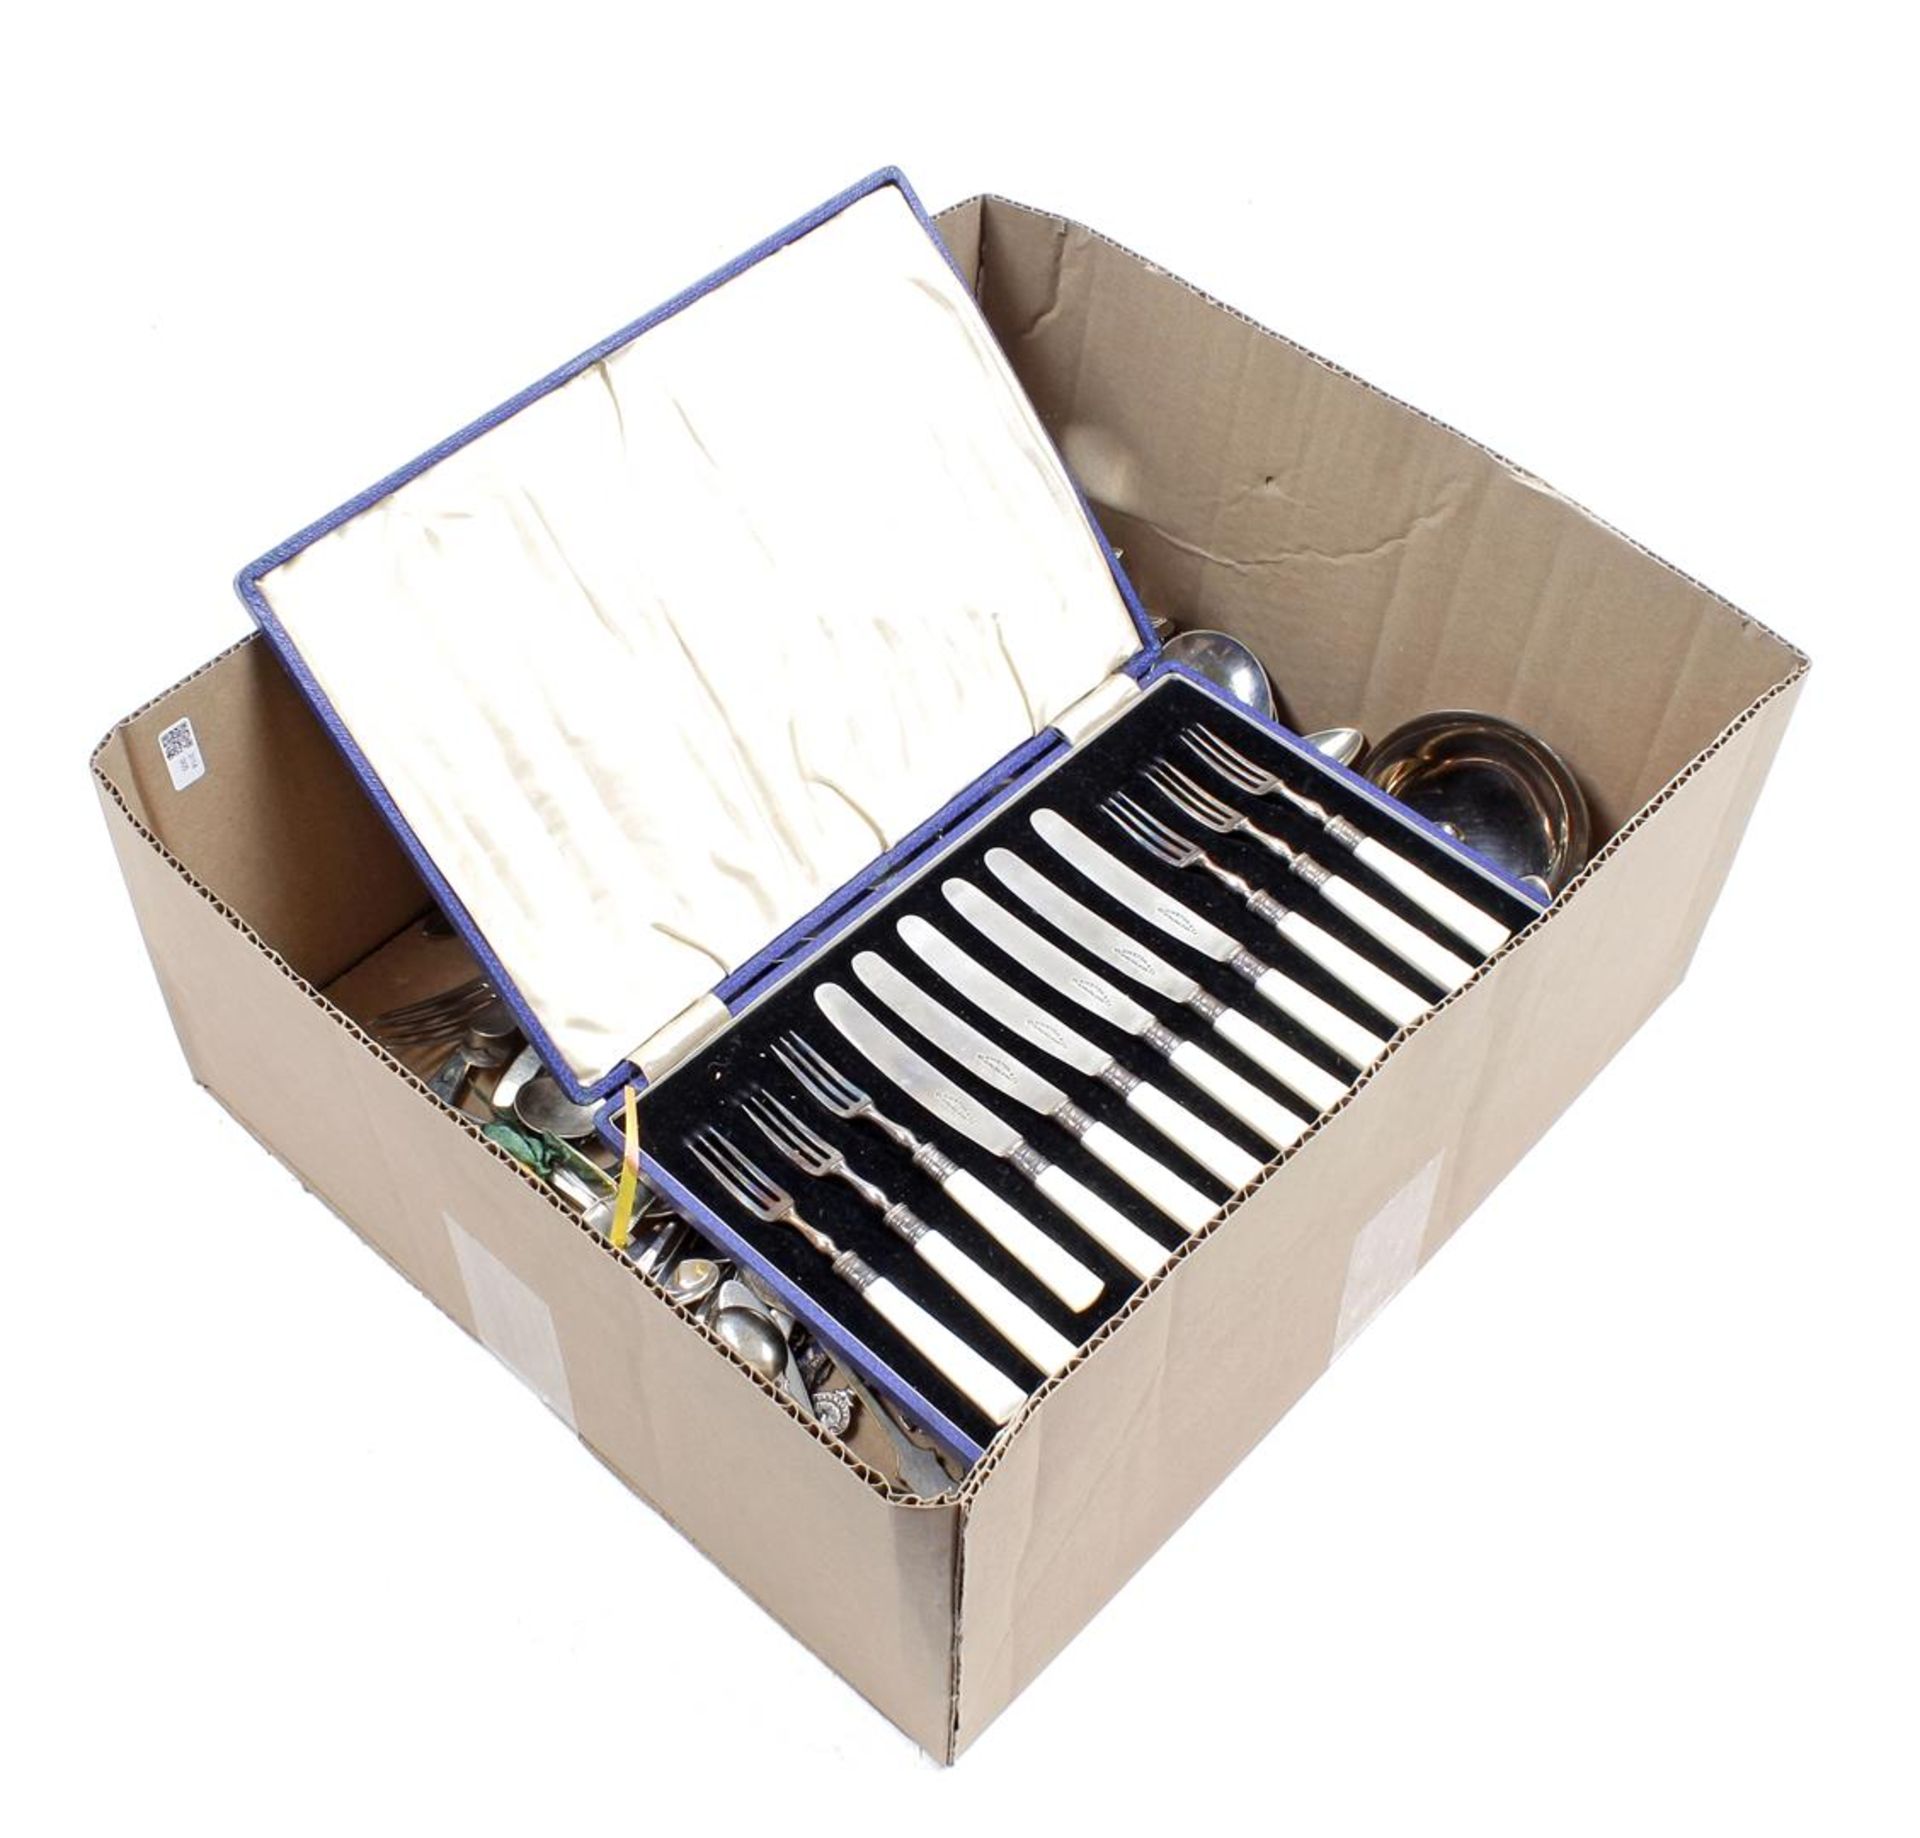 Box with various plate cutlery